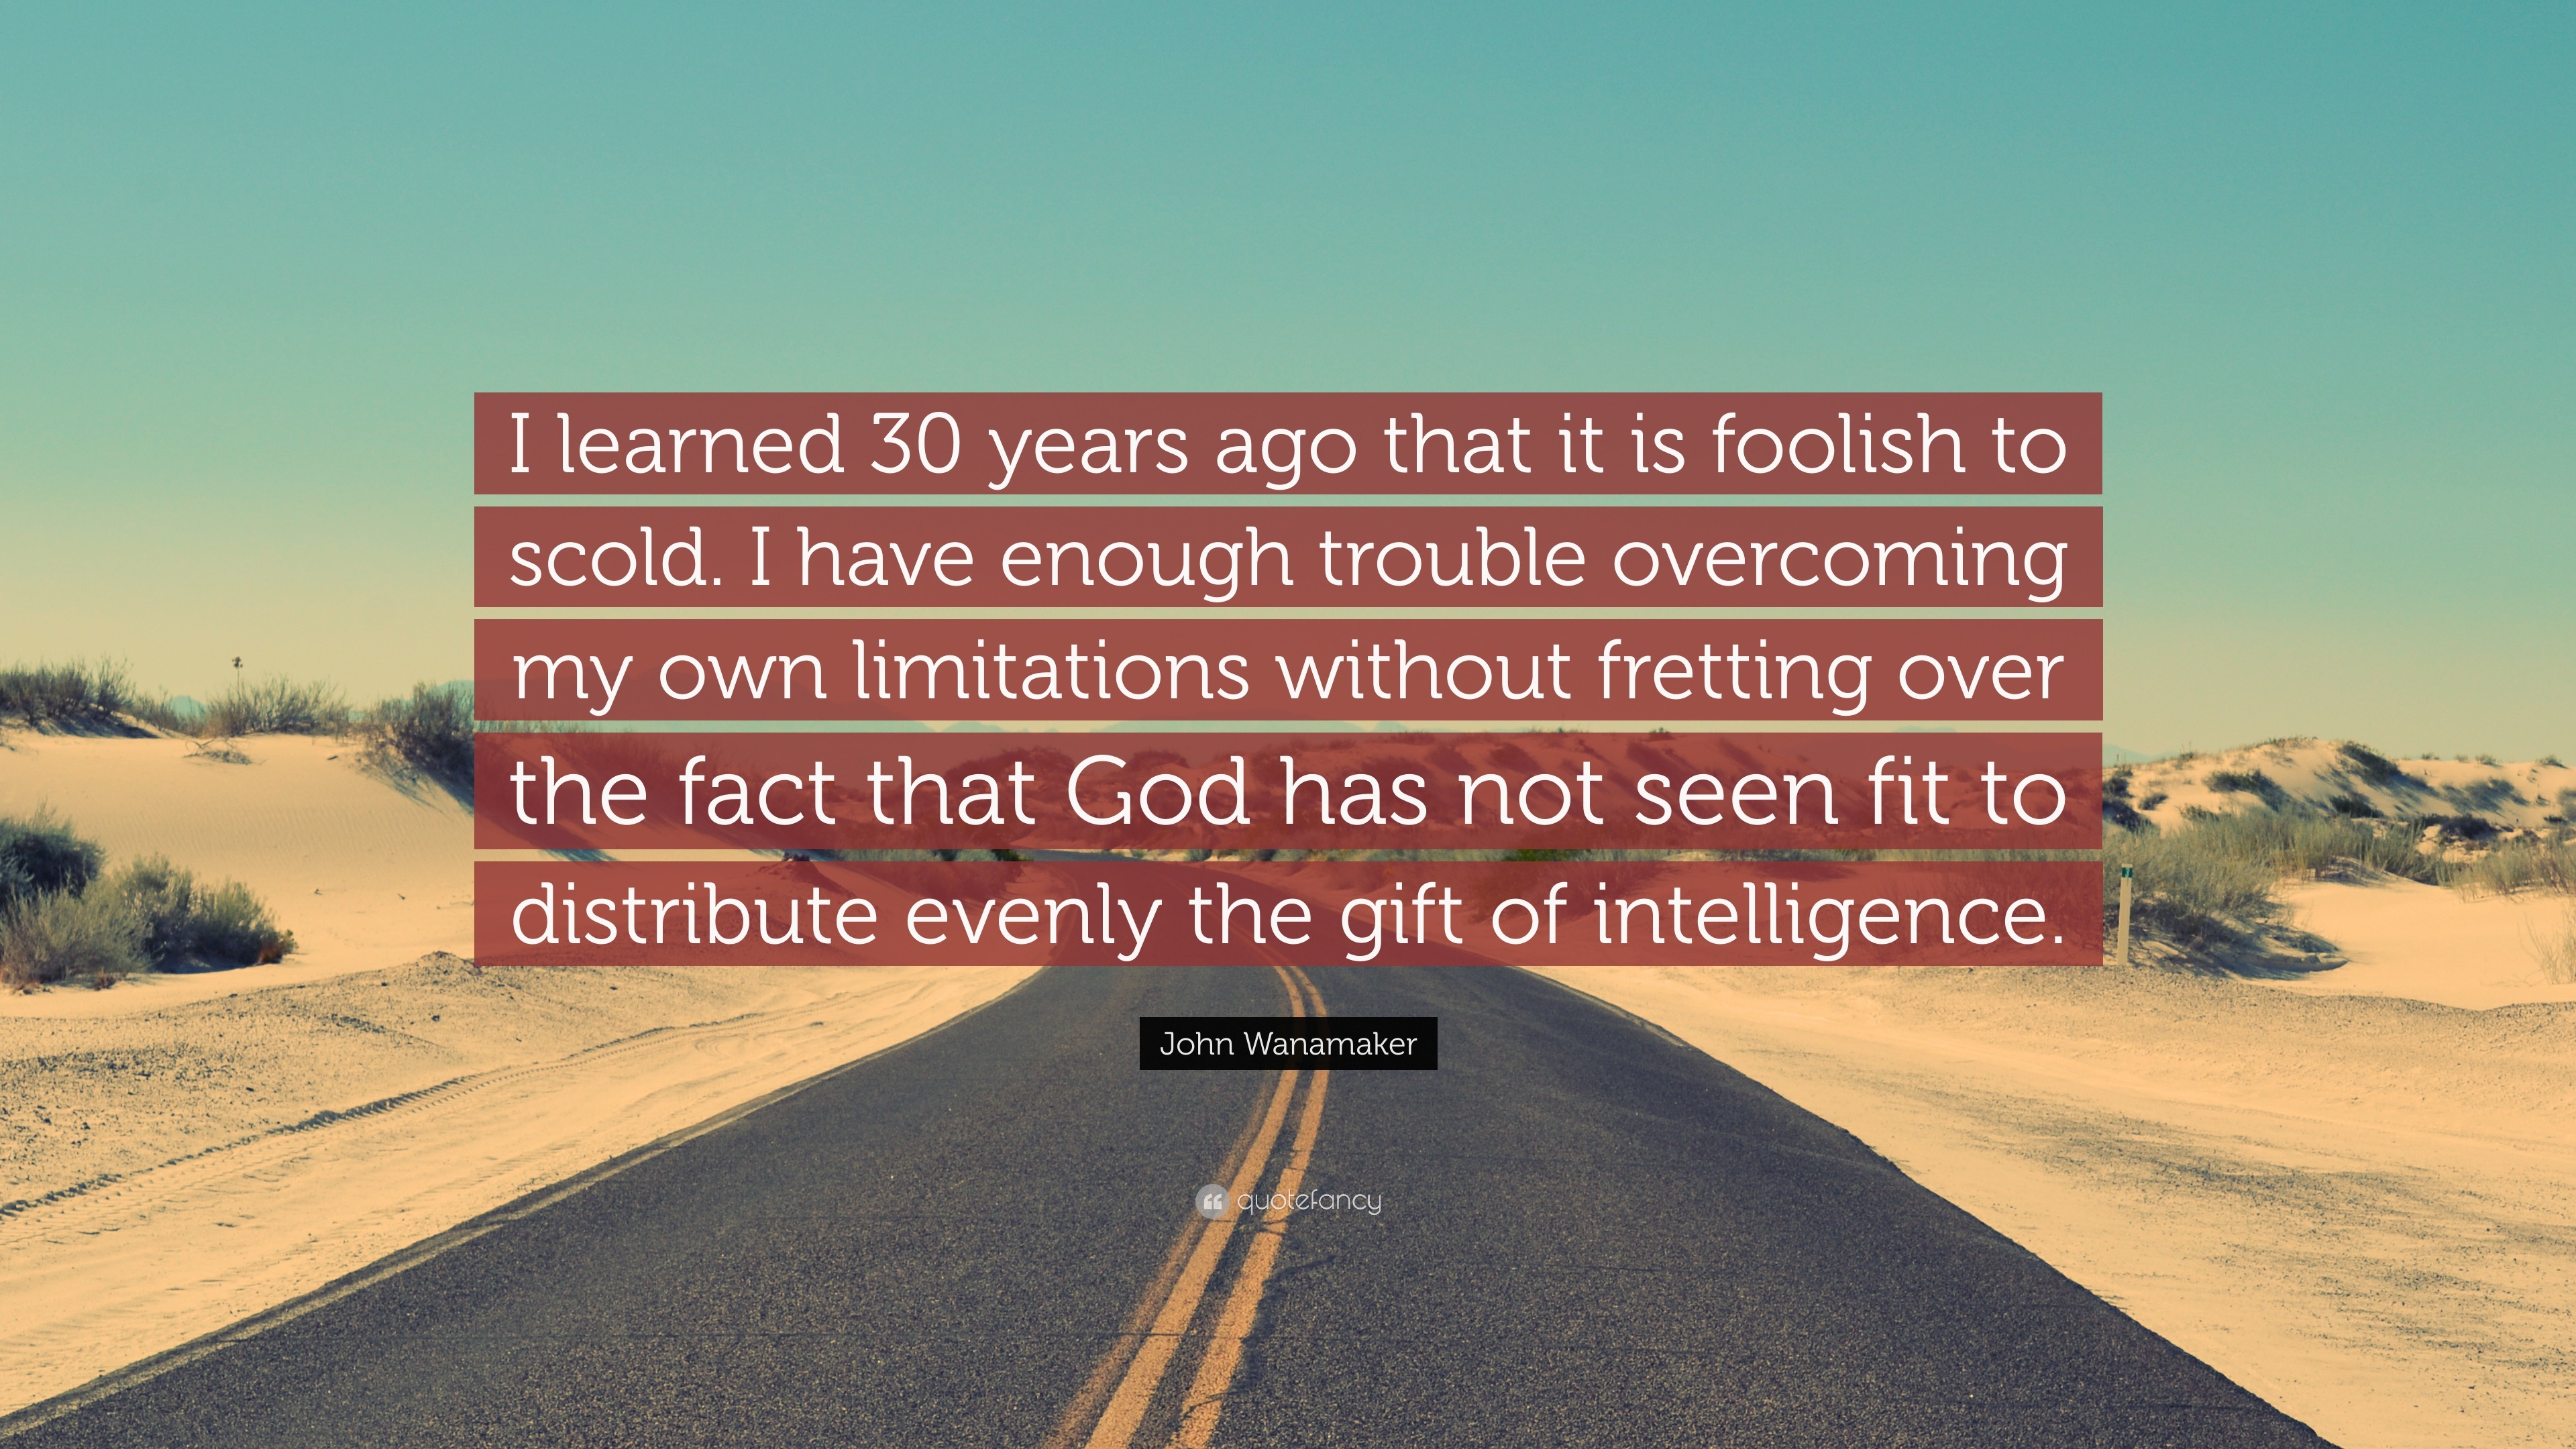 John Wanamaker Quote: “I learned 30 years ago that it is foolish 